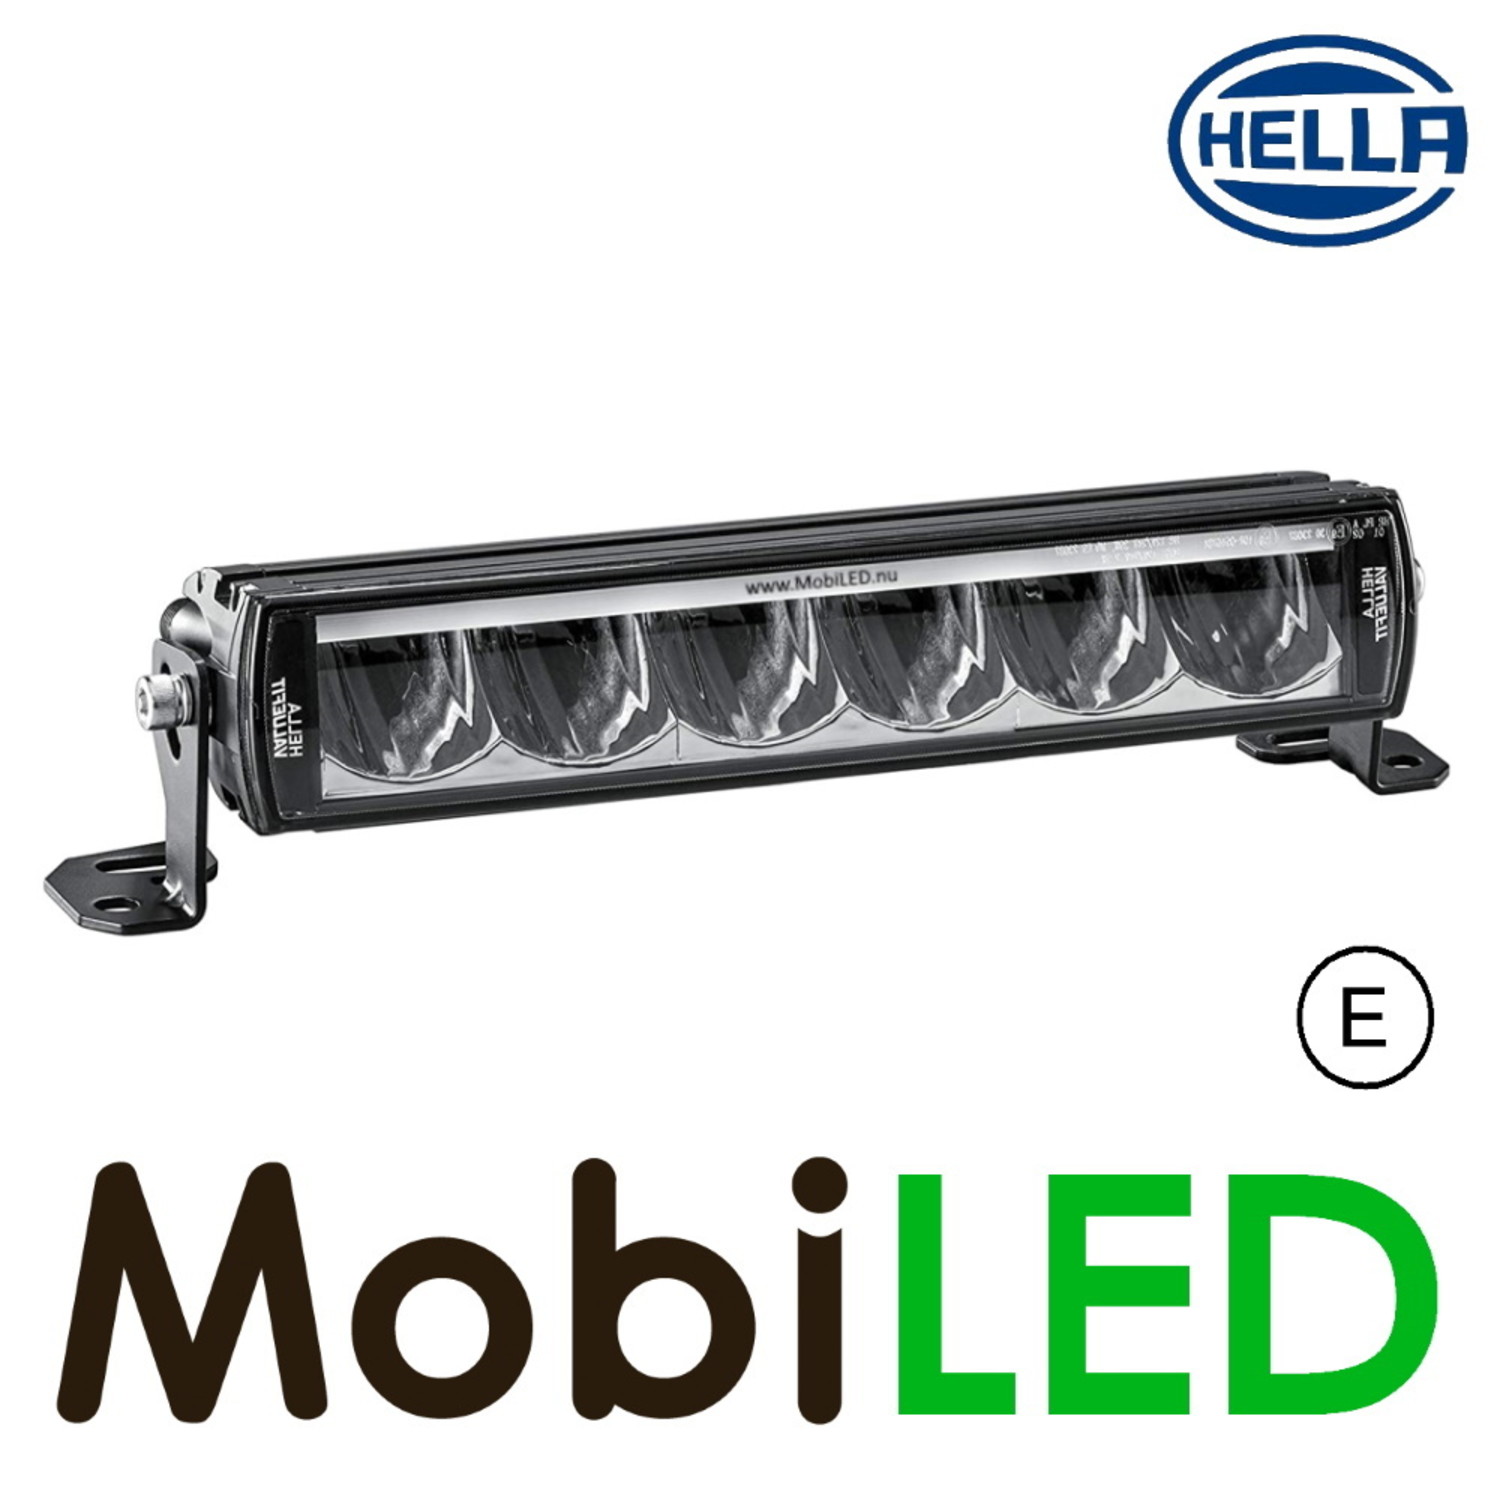 MobiLED  Hella LBE 320 Barre lumineuse 48 W 311 mm feu de position -  MobiLED